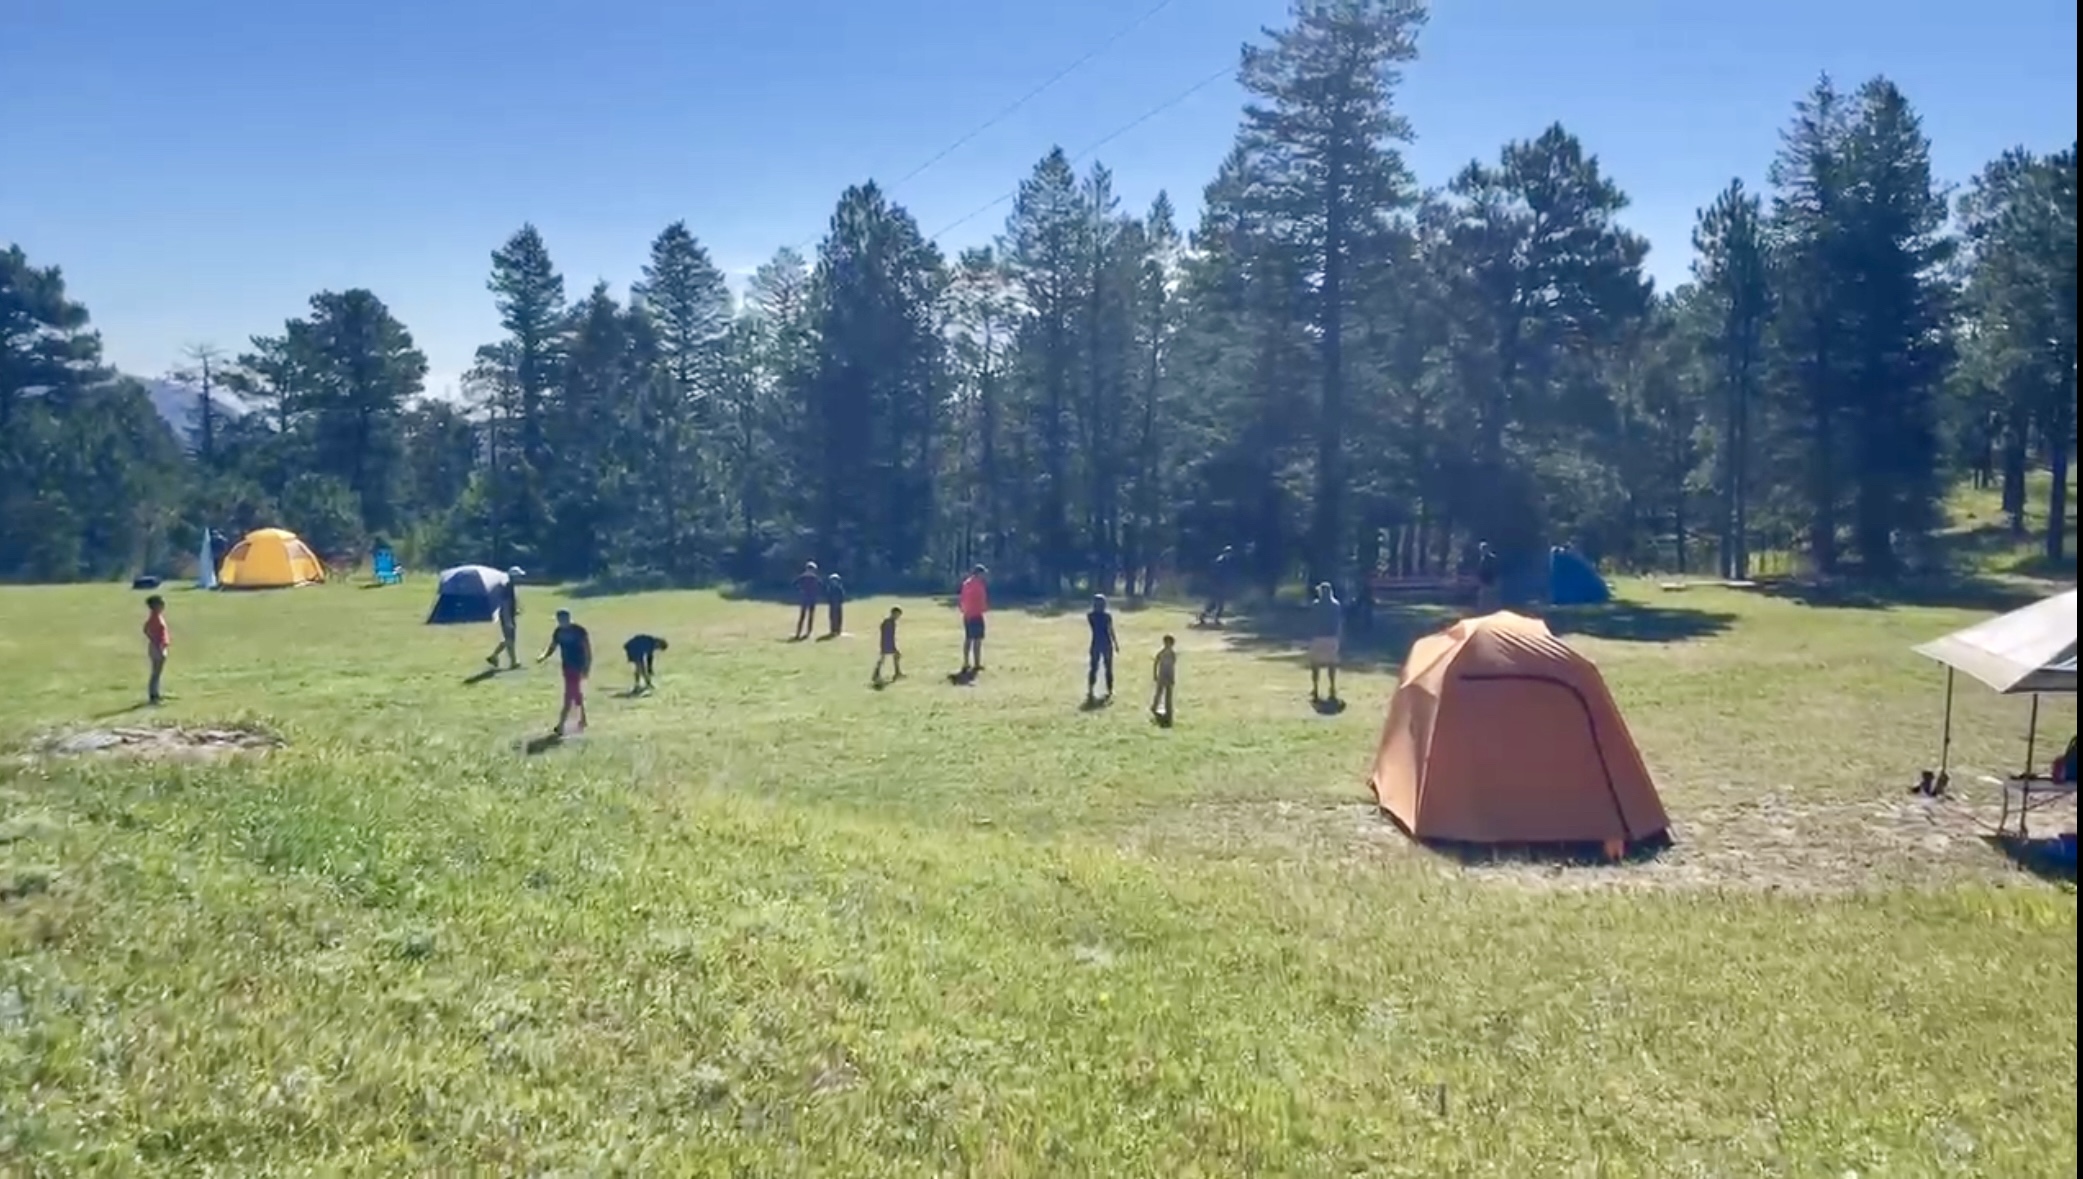 tents in an open field, camping, outdoors, community family camp